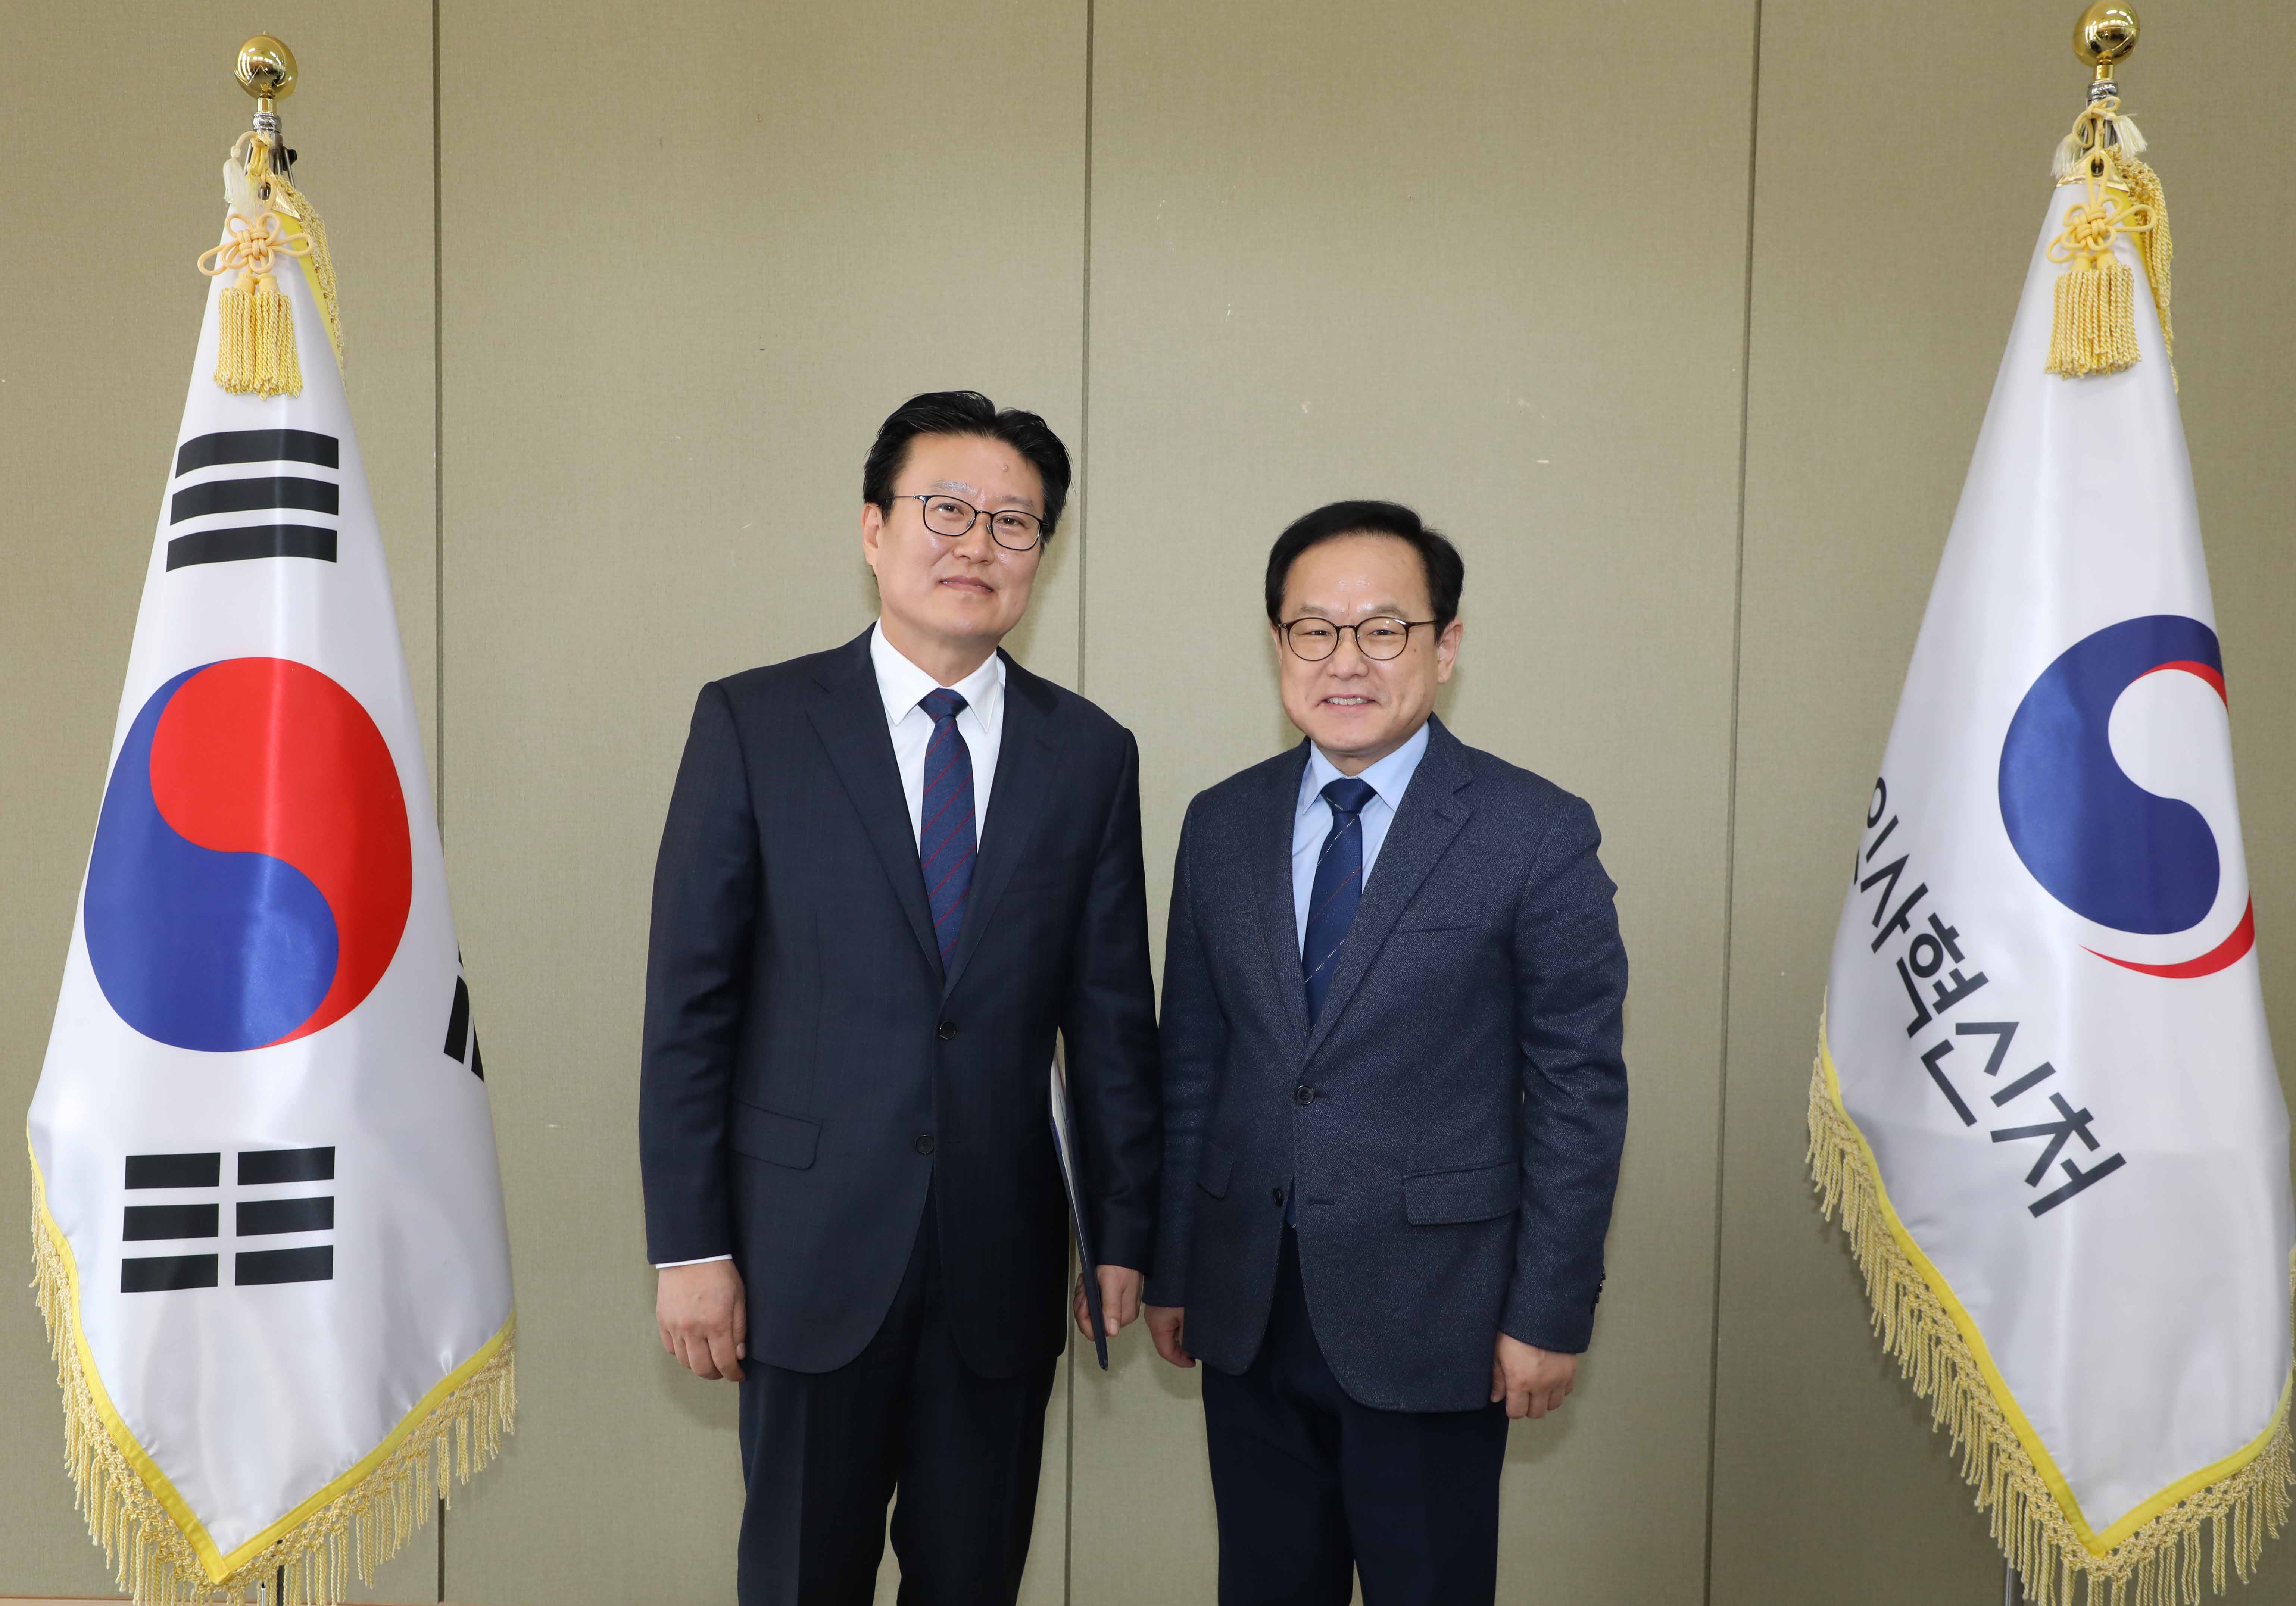 Mr. Jeon Sungsik, New Director-General of Global Education and Cooperation to Officially Start His Term